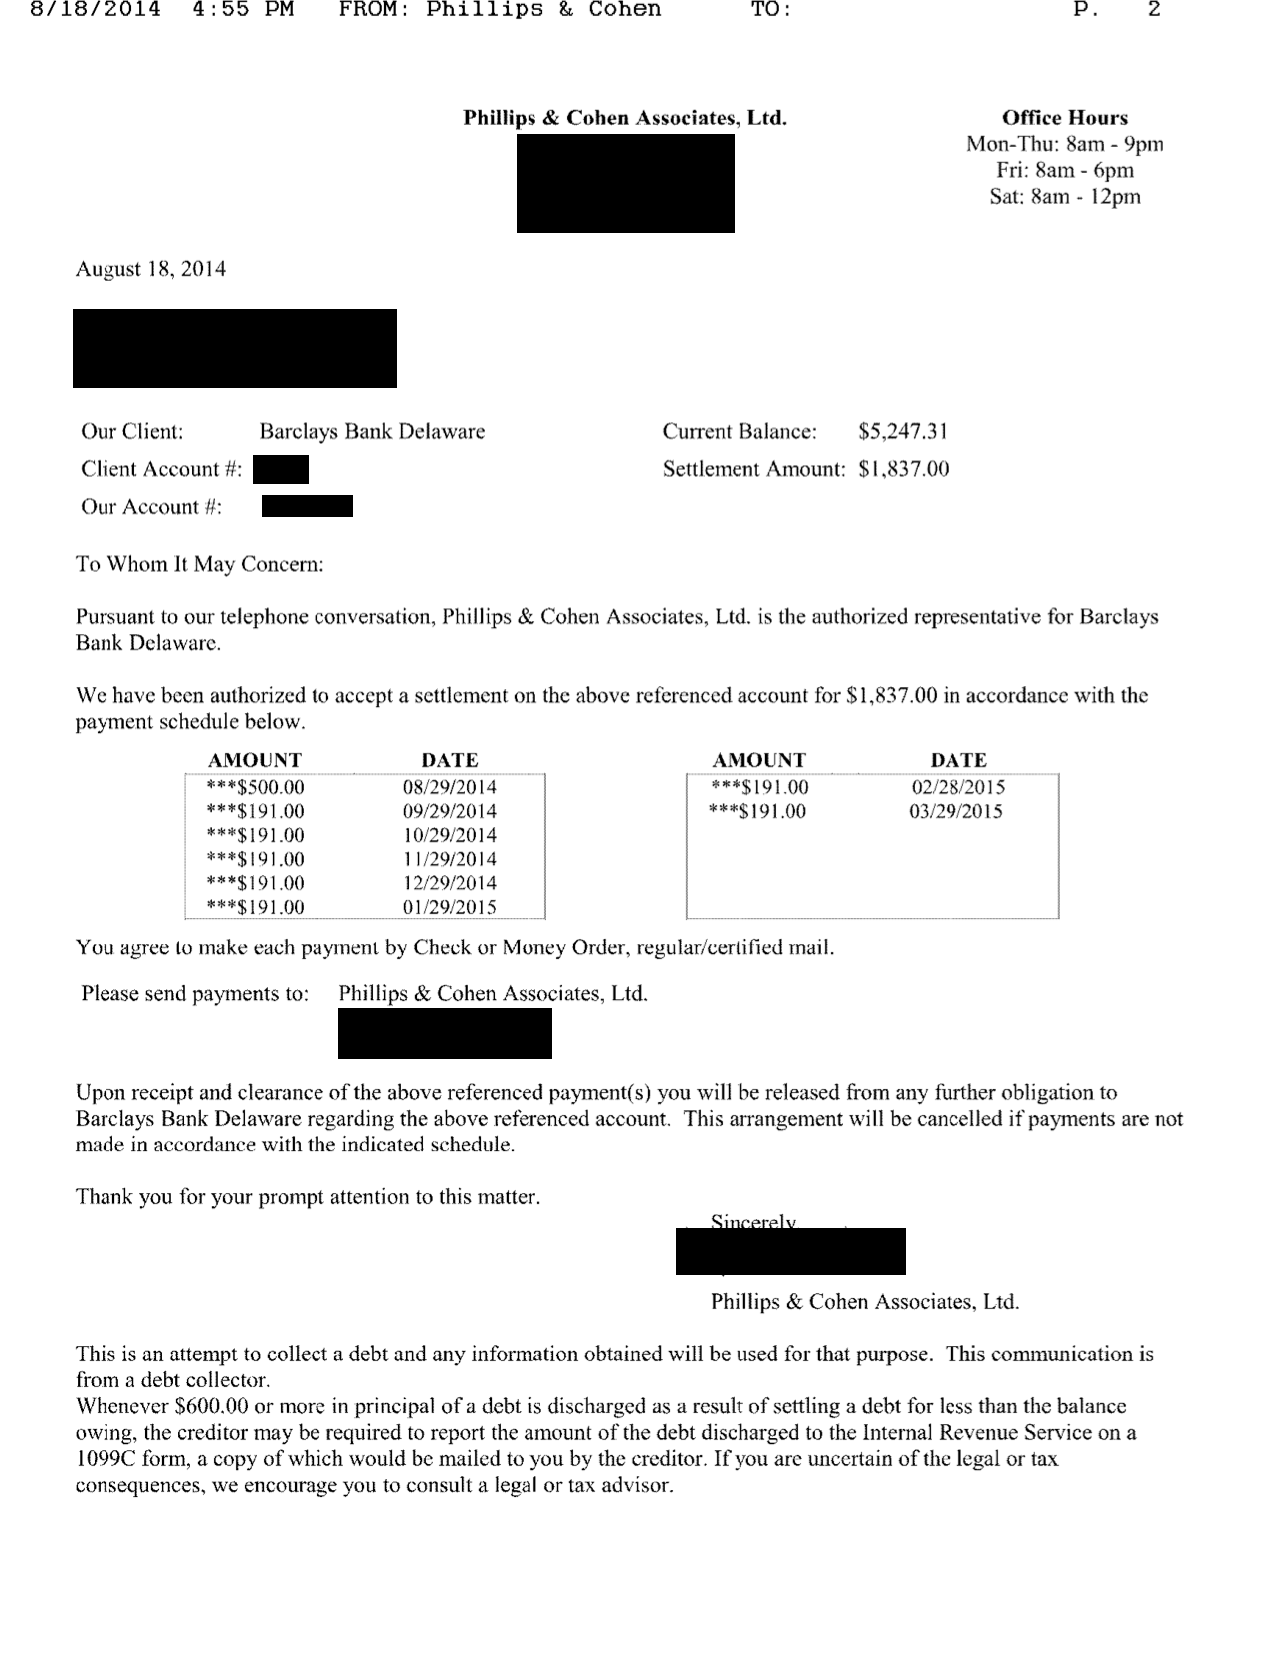 Image of a settlement letter with Barclays Bank Delaware with savings of 3,410 dollars